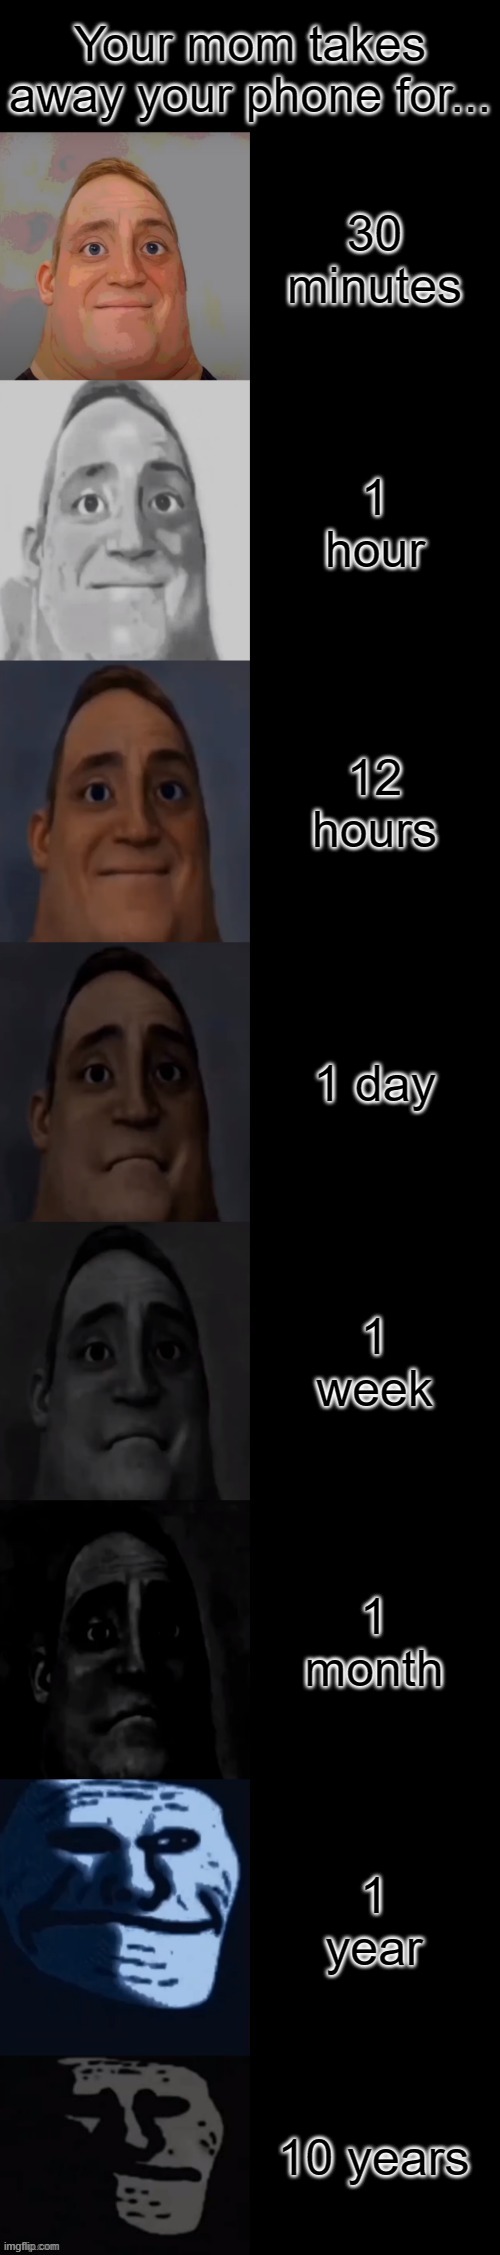 Mr incredible becoming sad (Your mom takes away your phone for...) | Your mom takes away your phone for... 30 minutes; 1 hour; 12 hours; 1 day; 1 week; 1 month; 1 year; 10 years | image tagged in mr incredible becoming sad,phone,taken | made w/ Imgflip meme maker